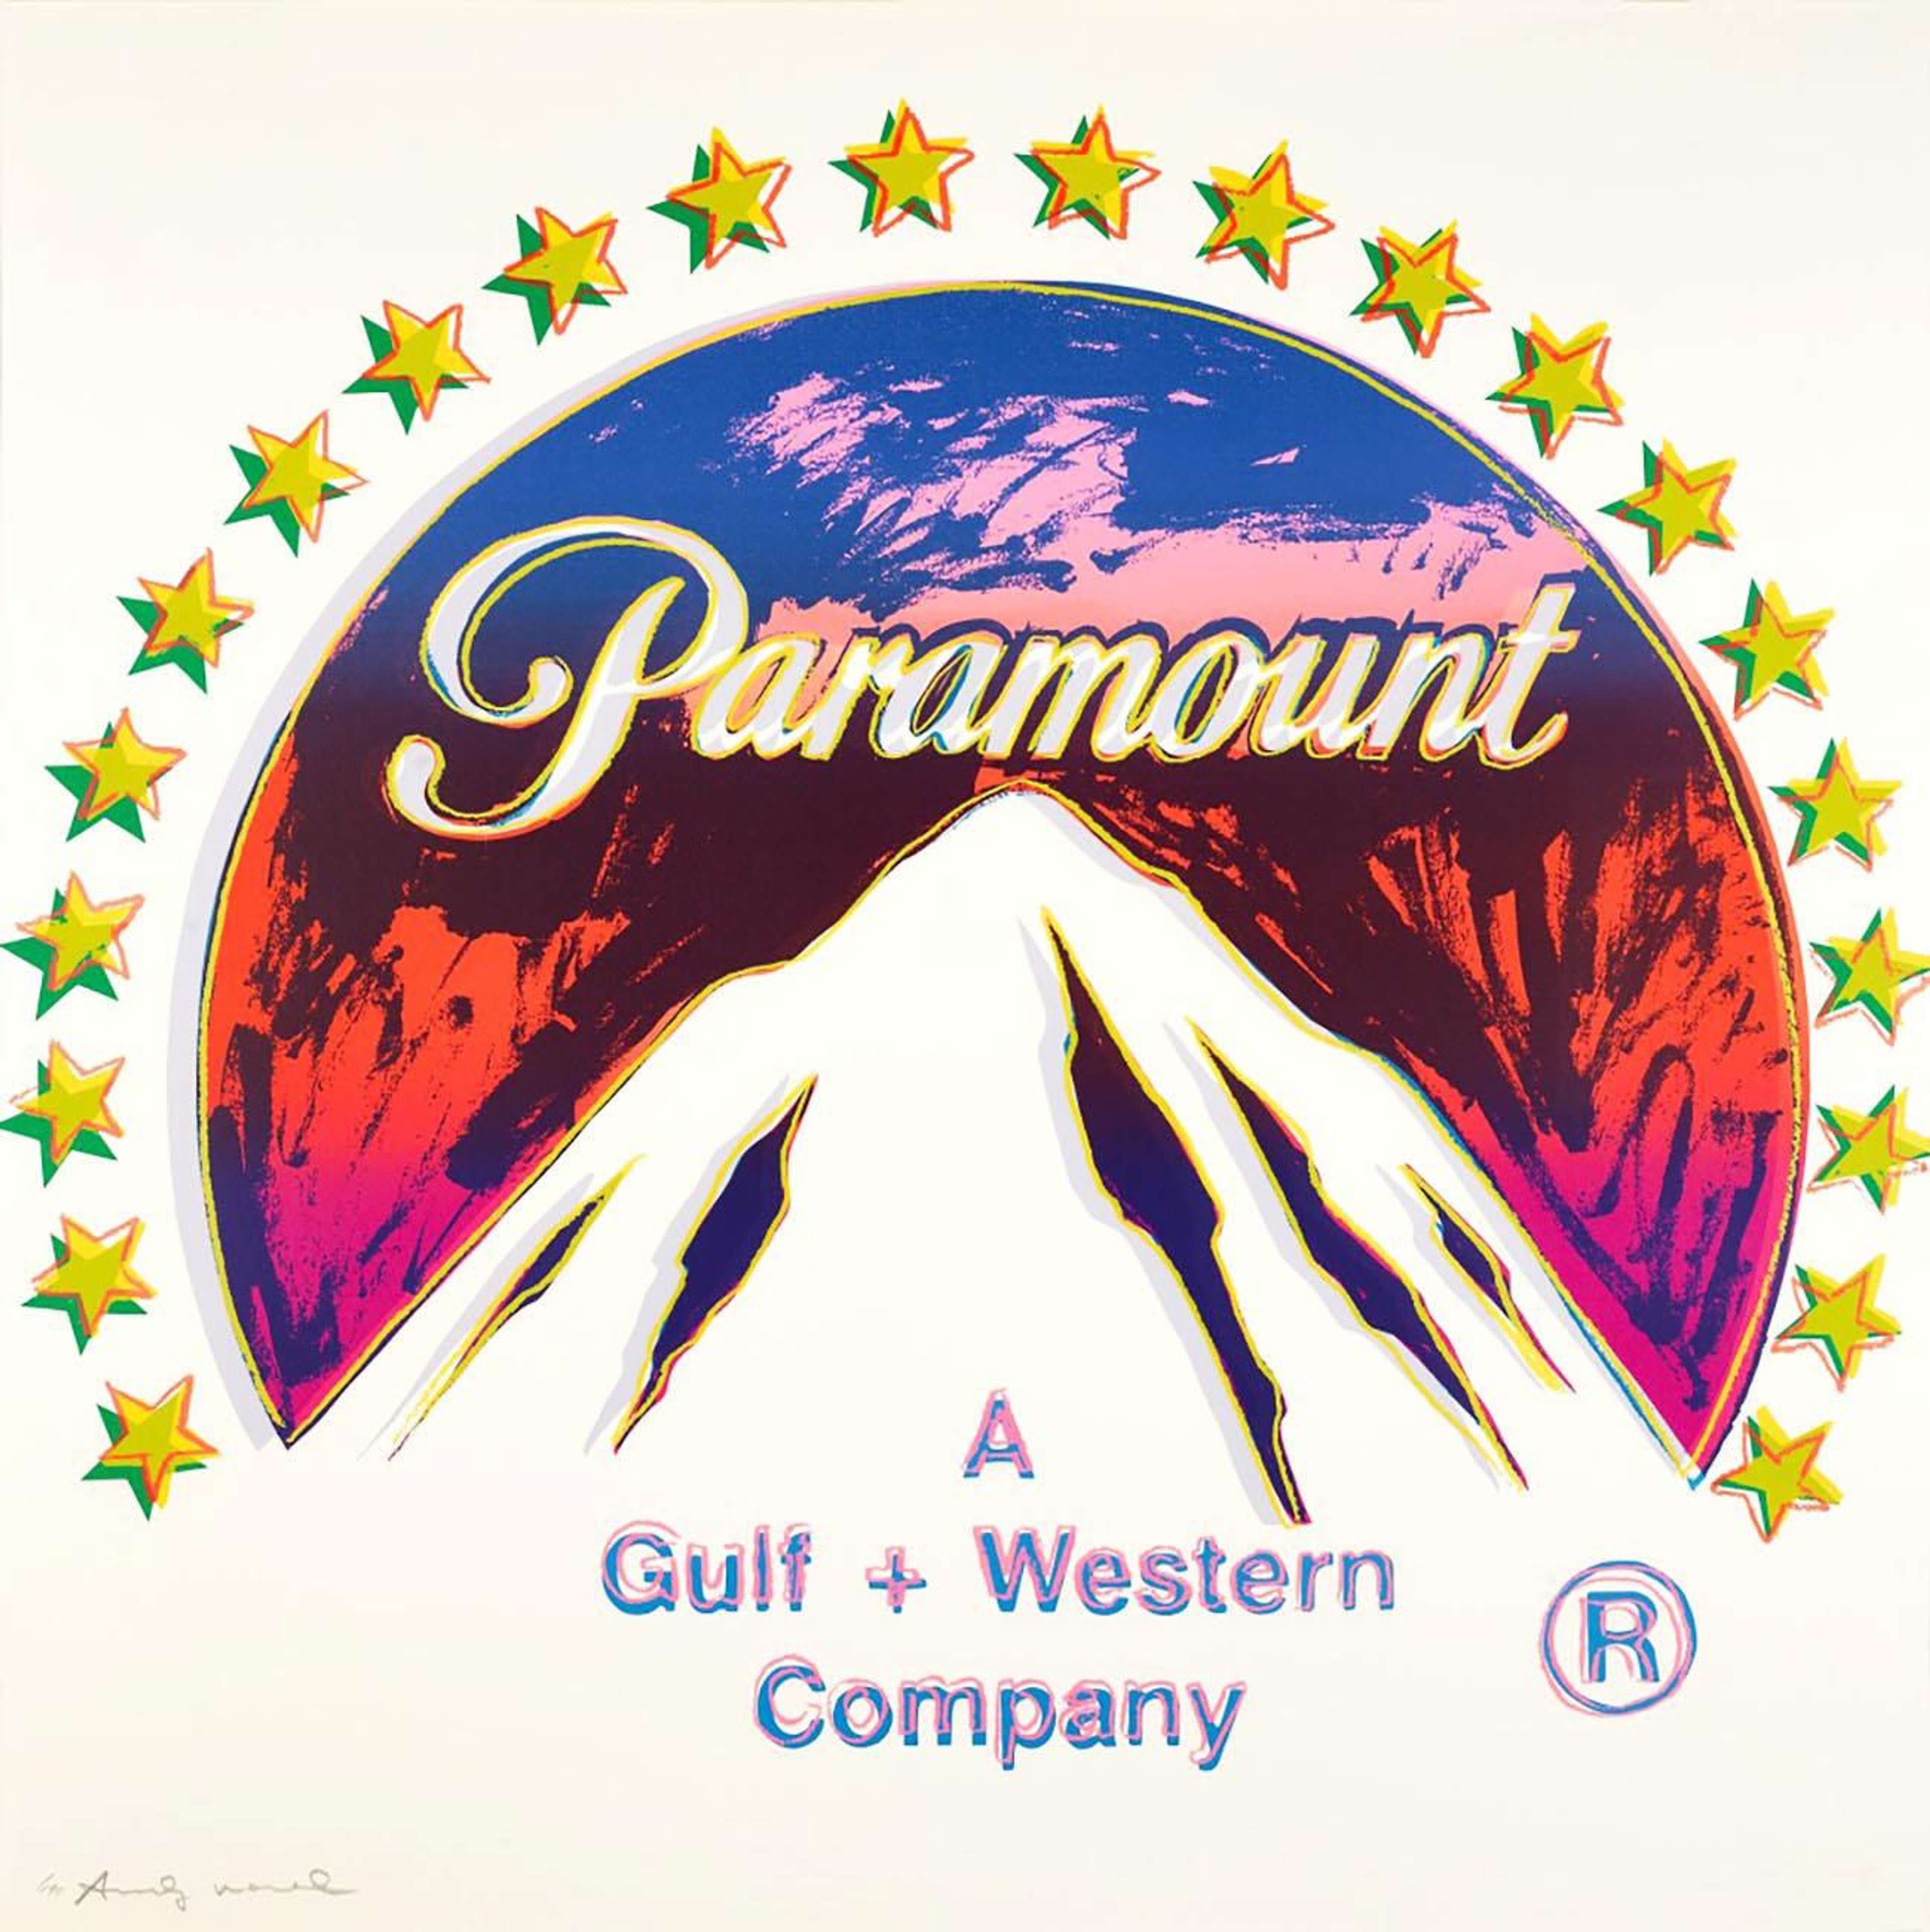 A screeprint by Andy Warhol depicting the Paramount logo against a white background in bright colours.